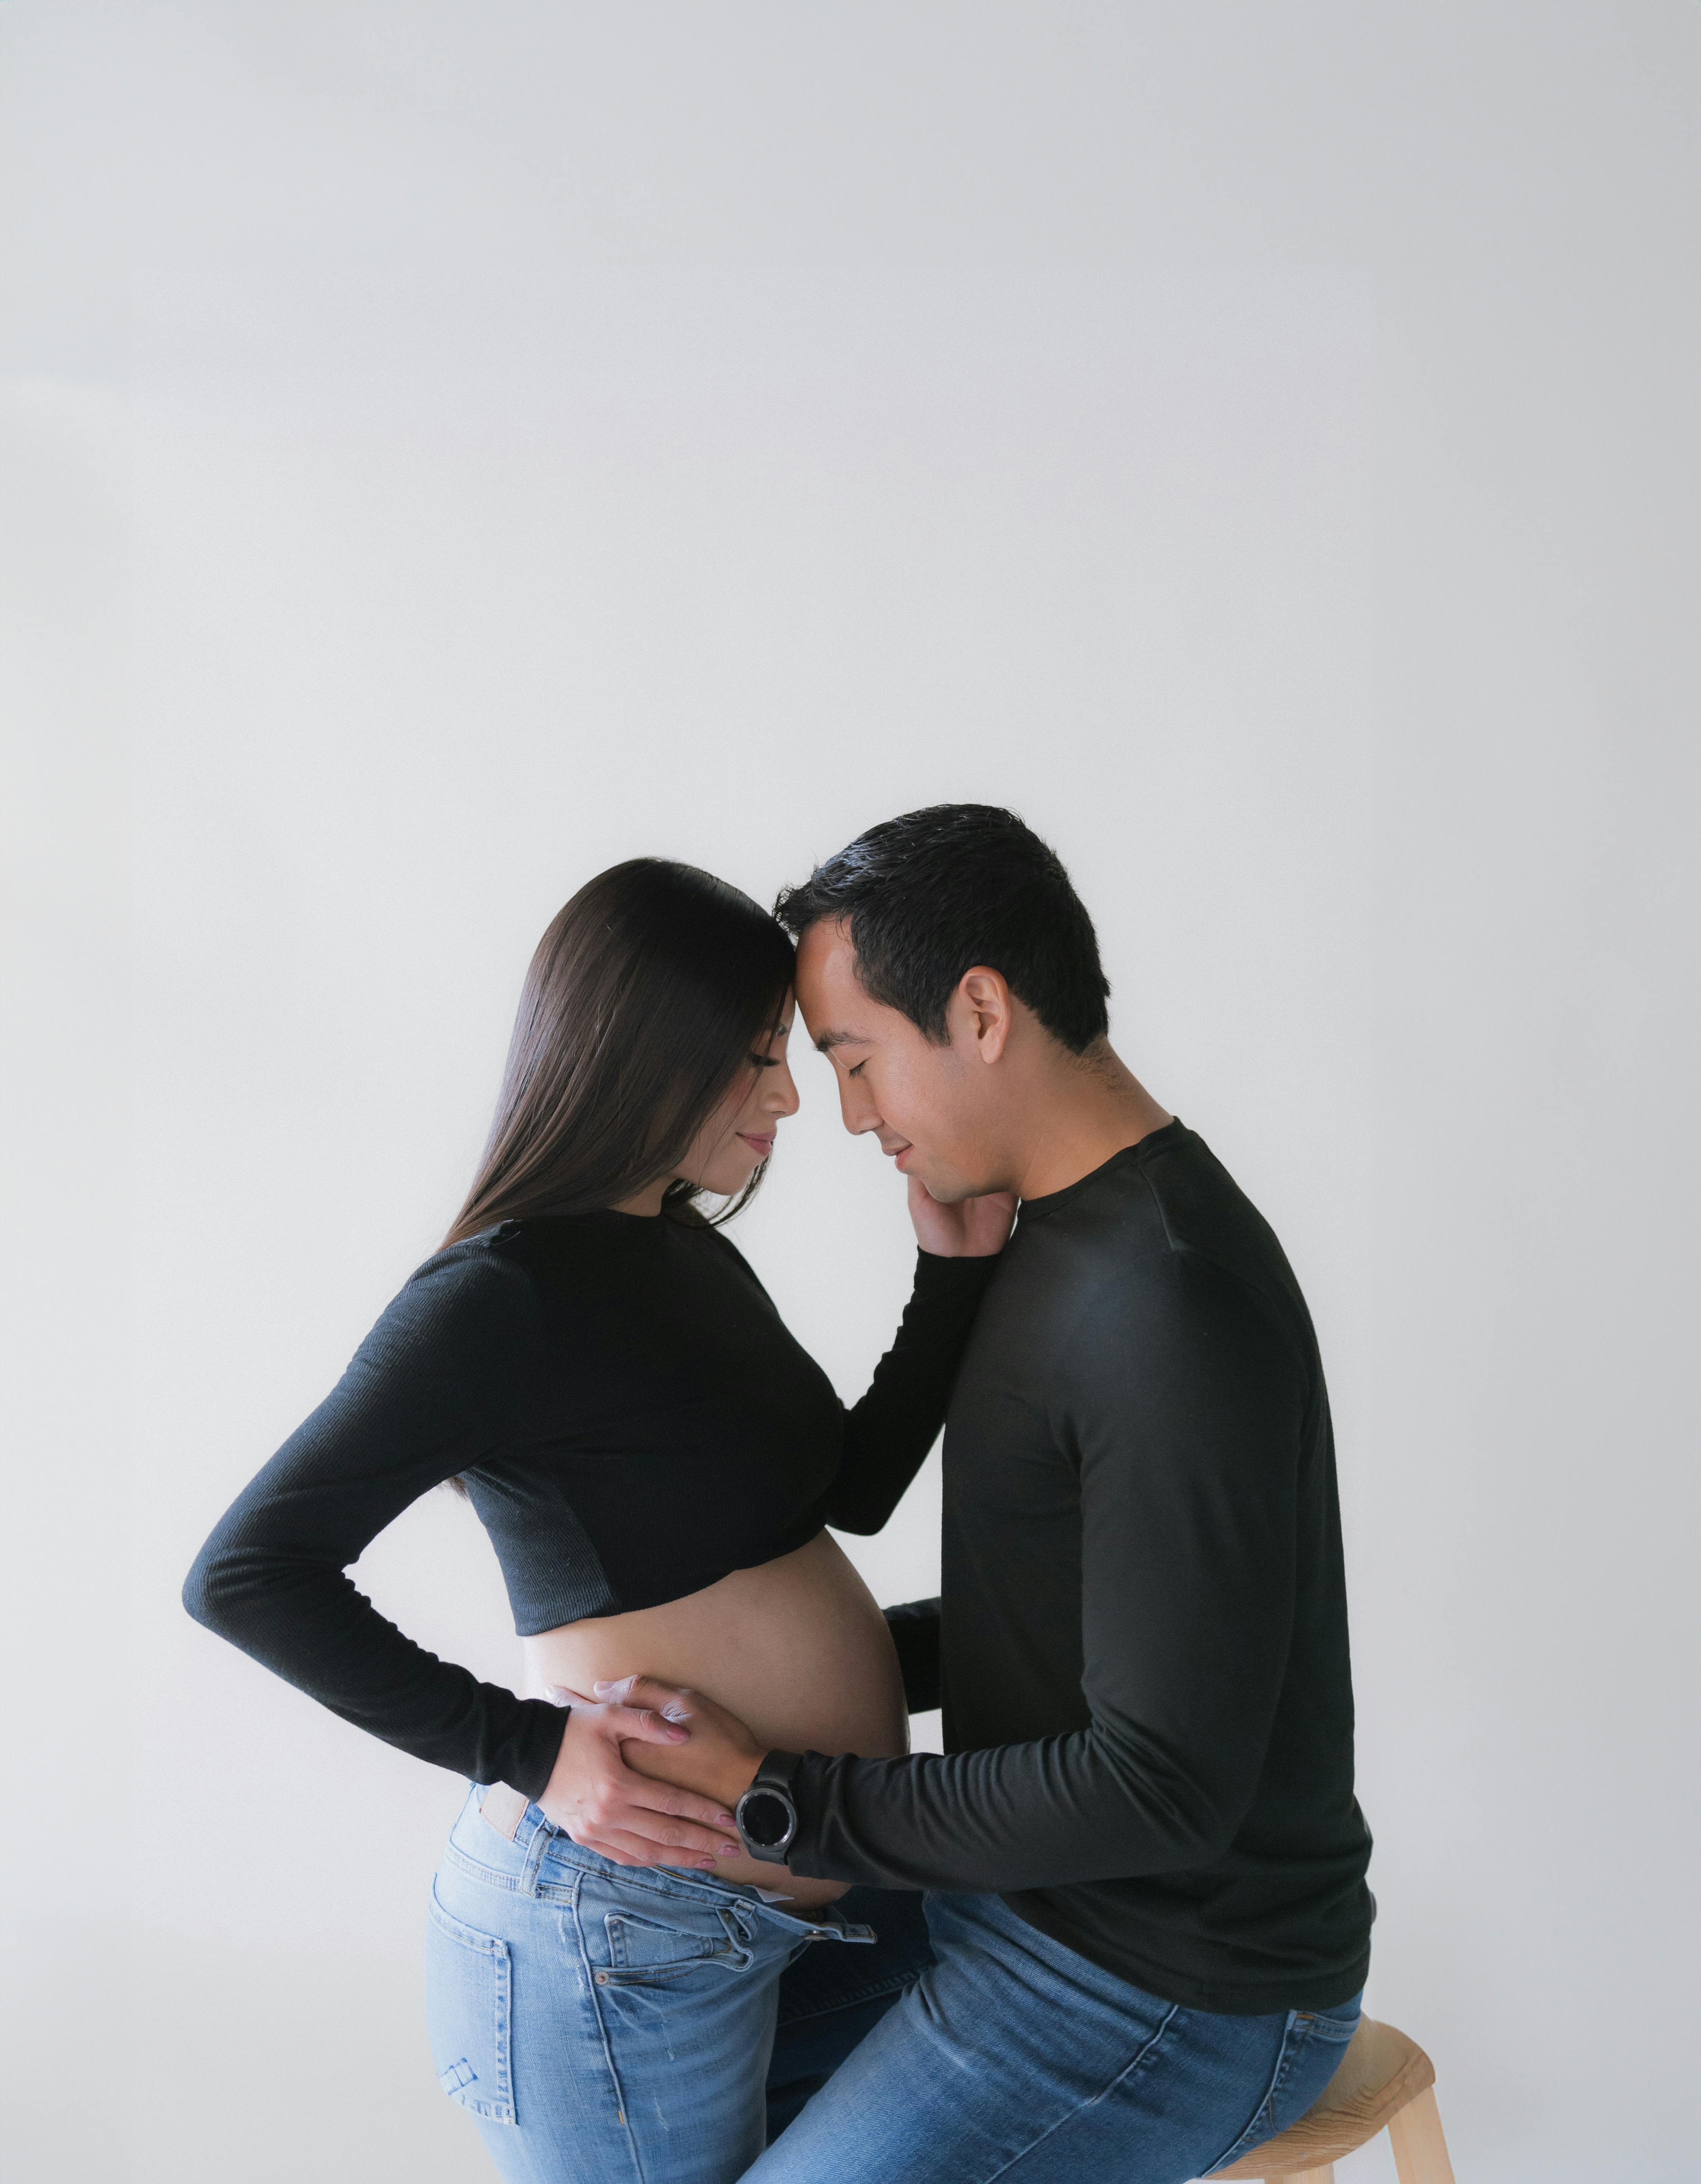 Pregnant Happy Couple Poses Over Blue Stock Photo 1618649092 | Shutterstock